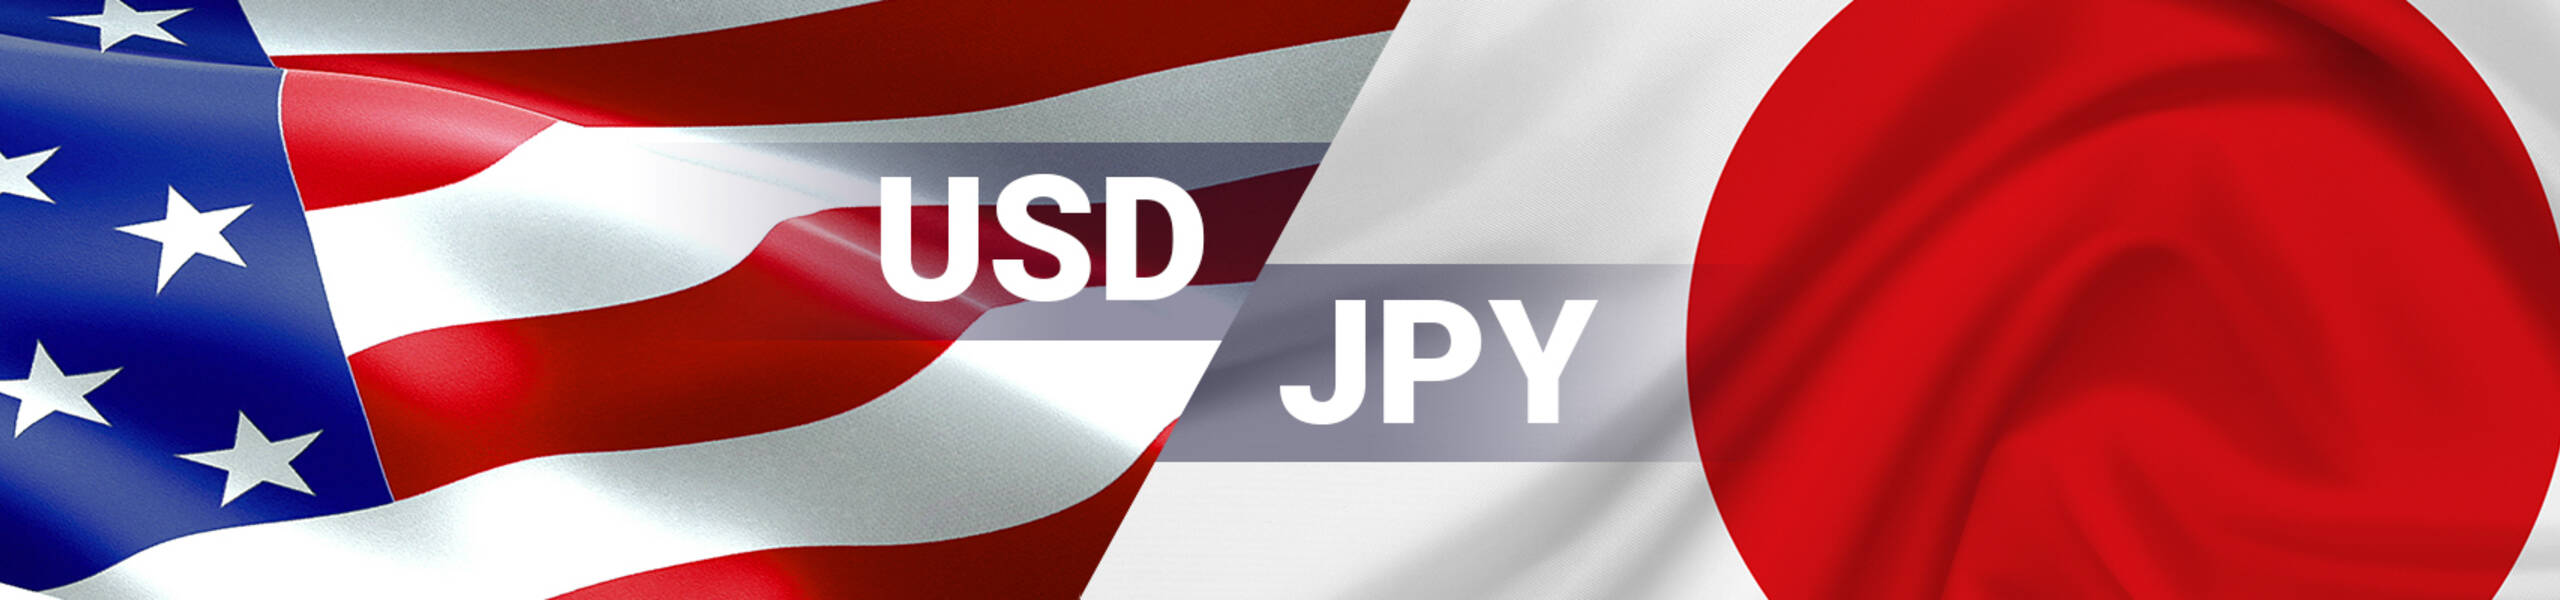 USD/JPY: the Bulls don’t want to give up